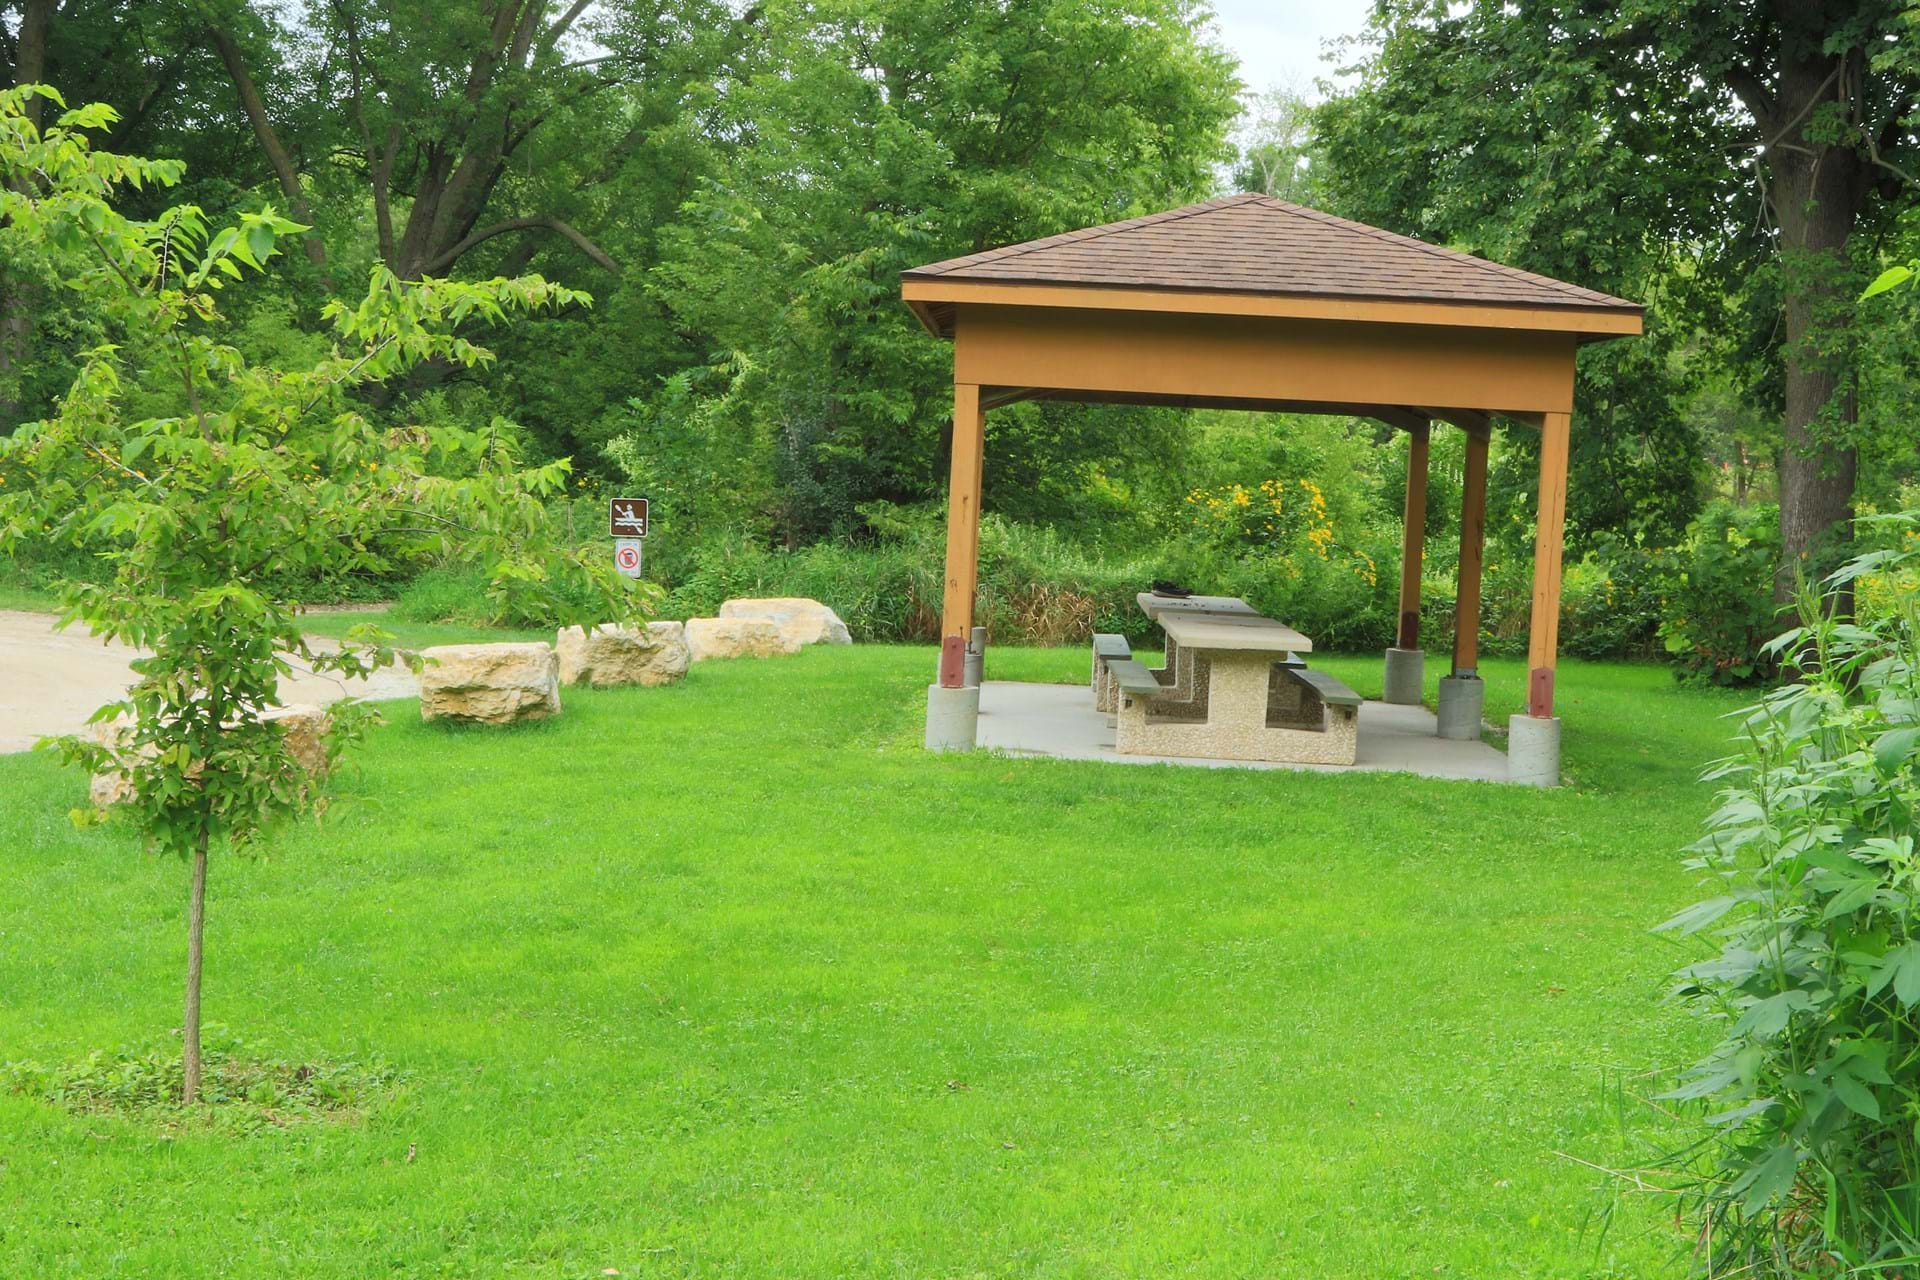 A shelter with a picnic table at the park